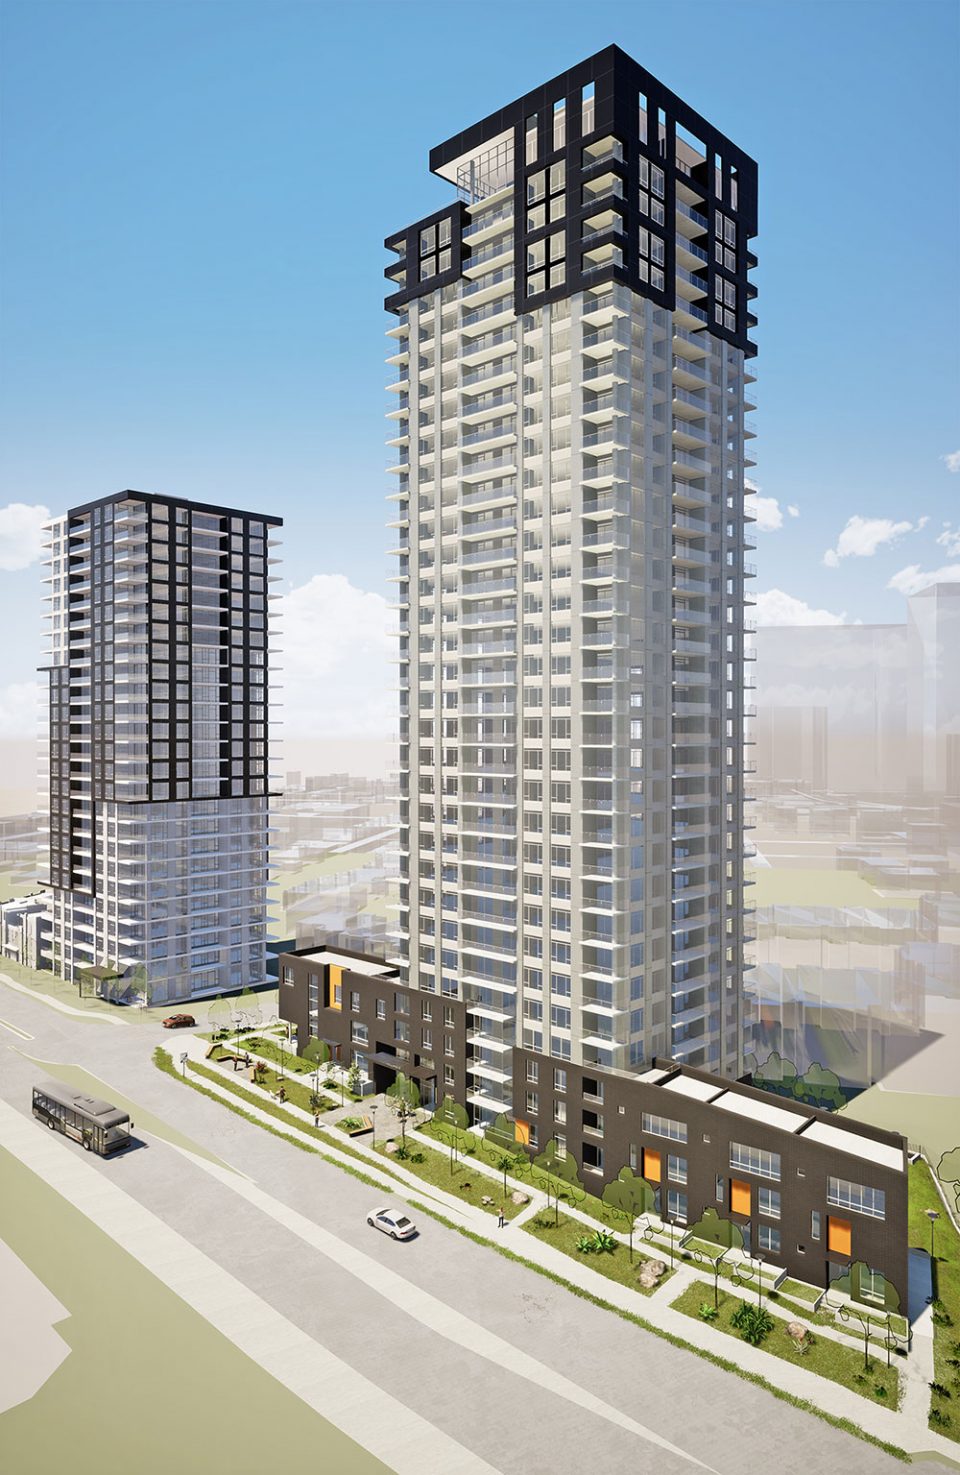 The Holland Phase 2 rendering